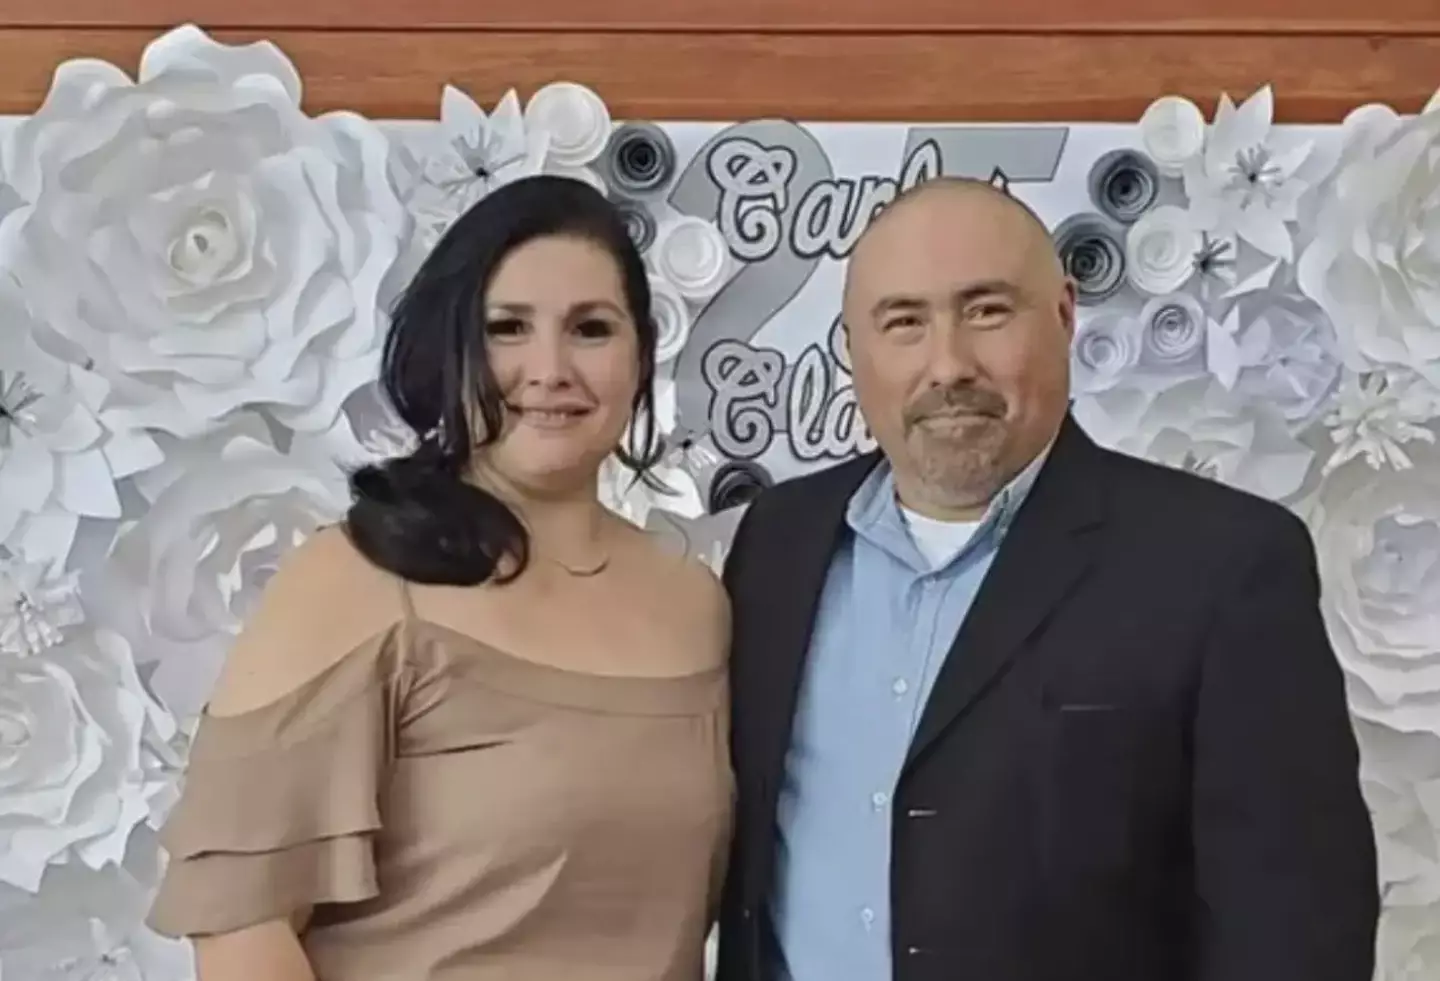 Uvalde schoolteacher Irma Garcia's husband passed away two days after the shooting.